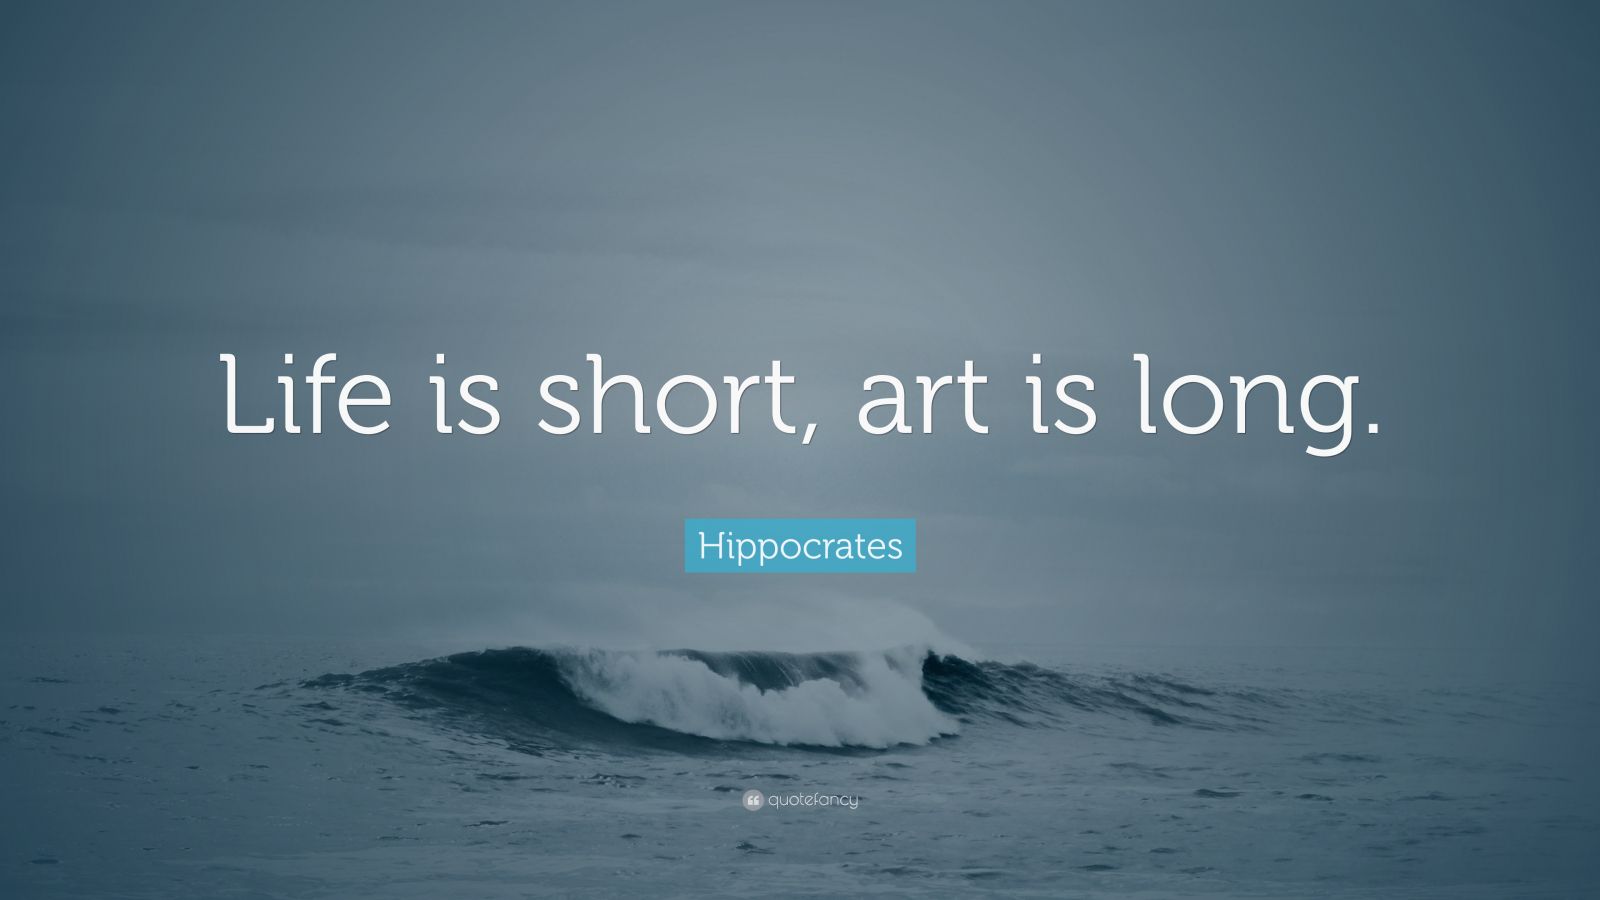 hippocrates-quote-life-is-short-art-is-long